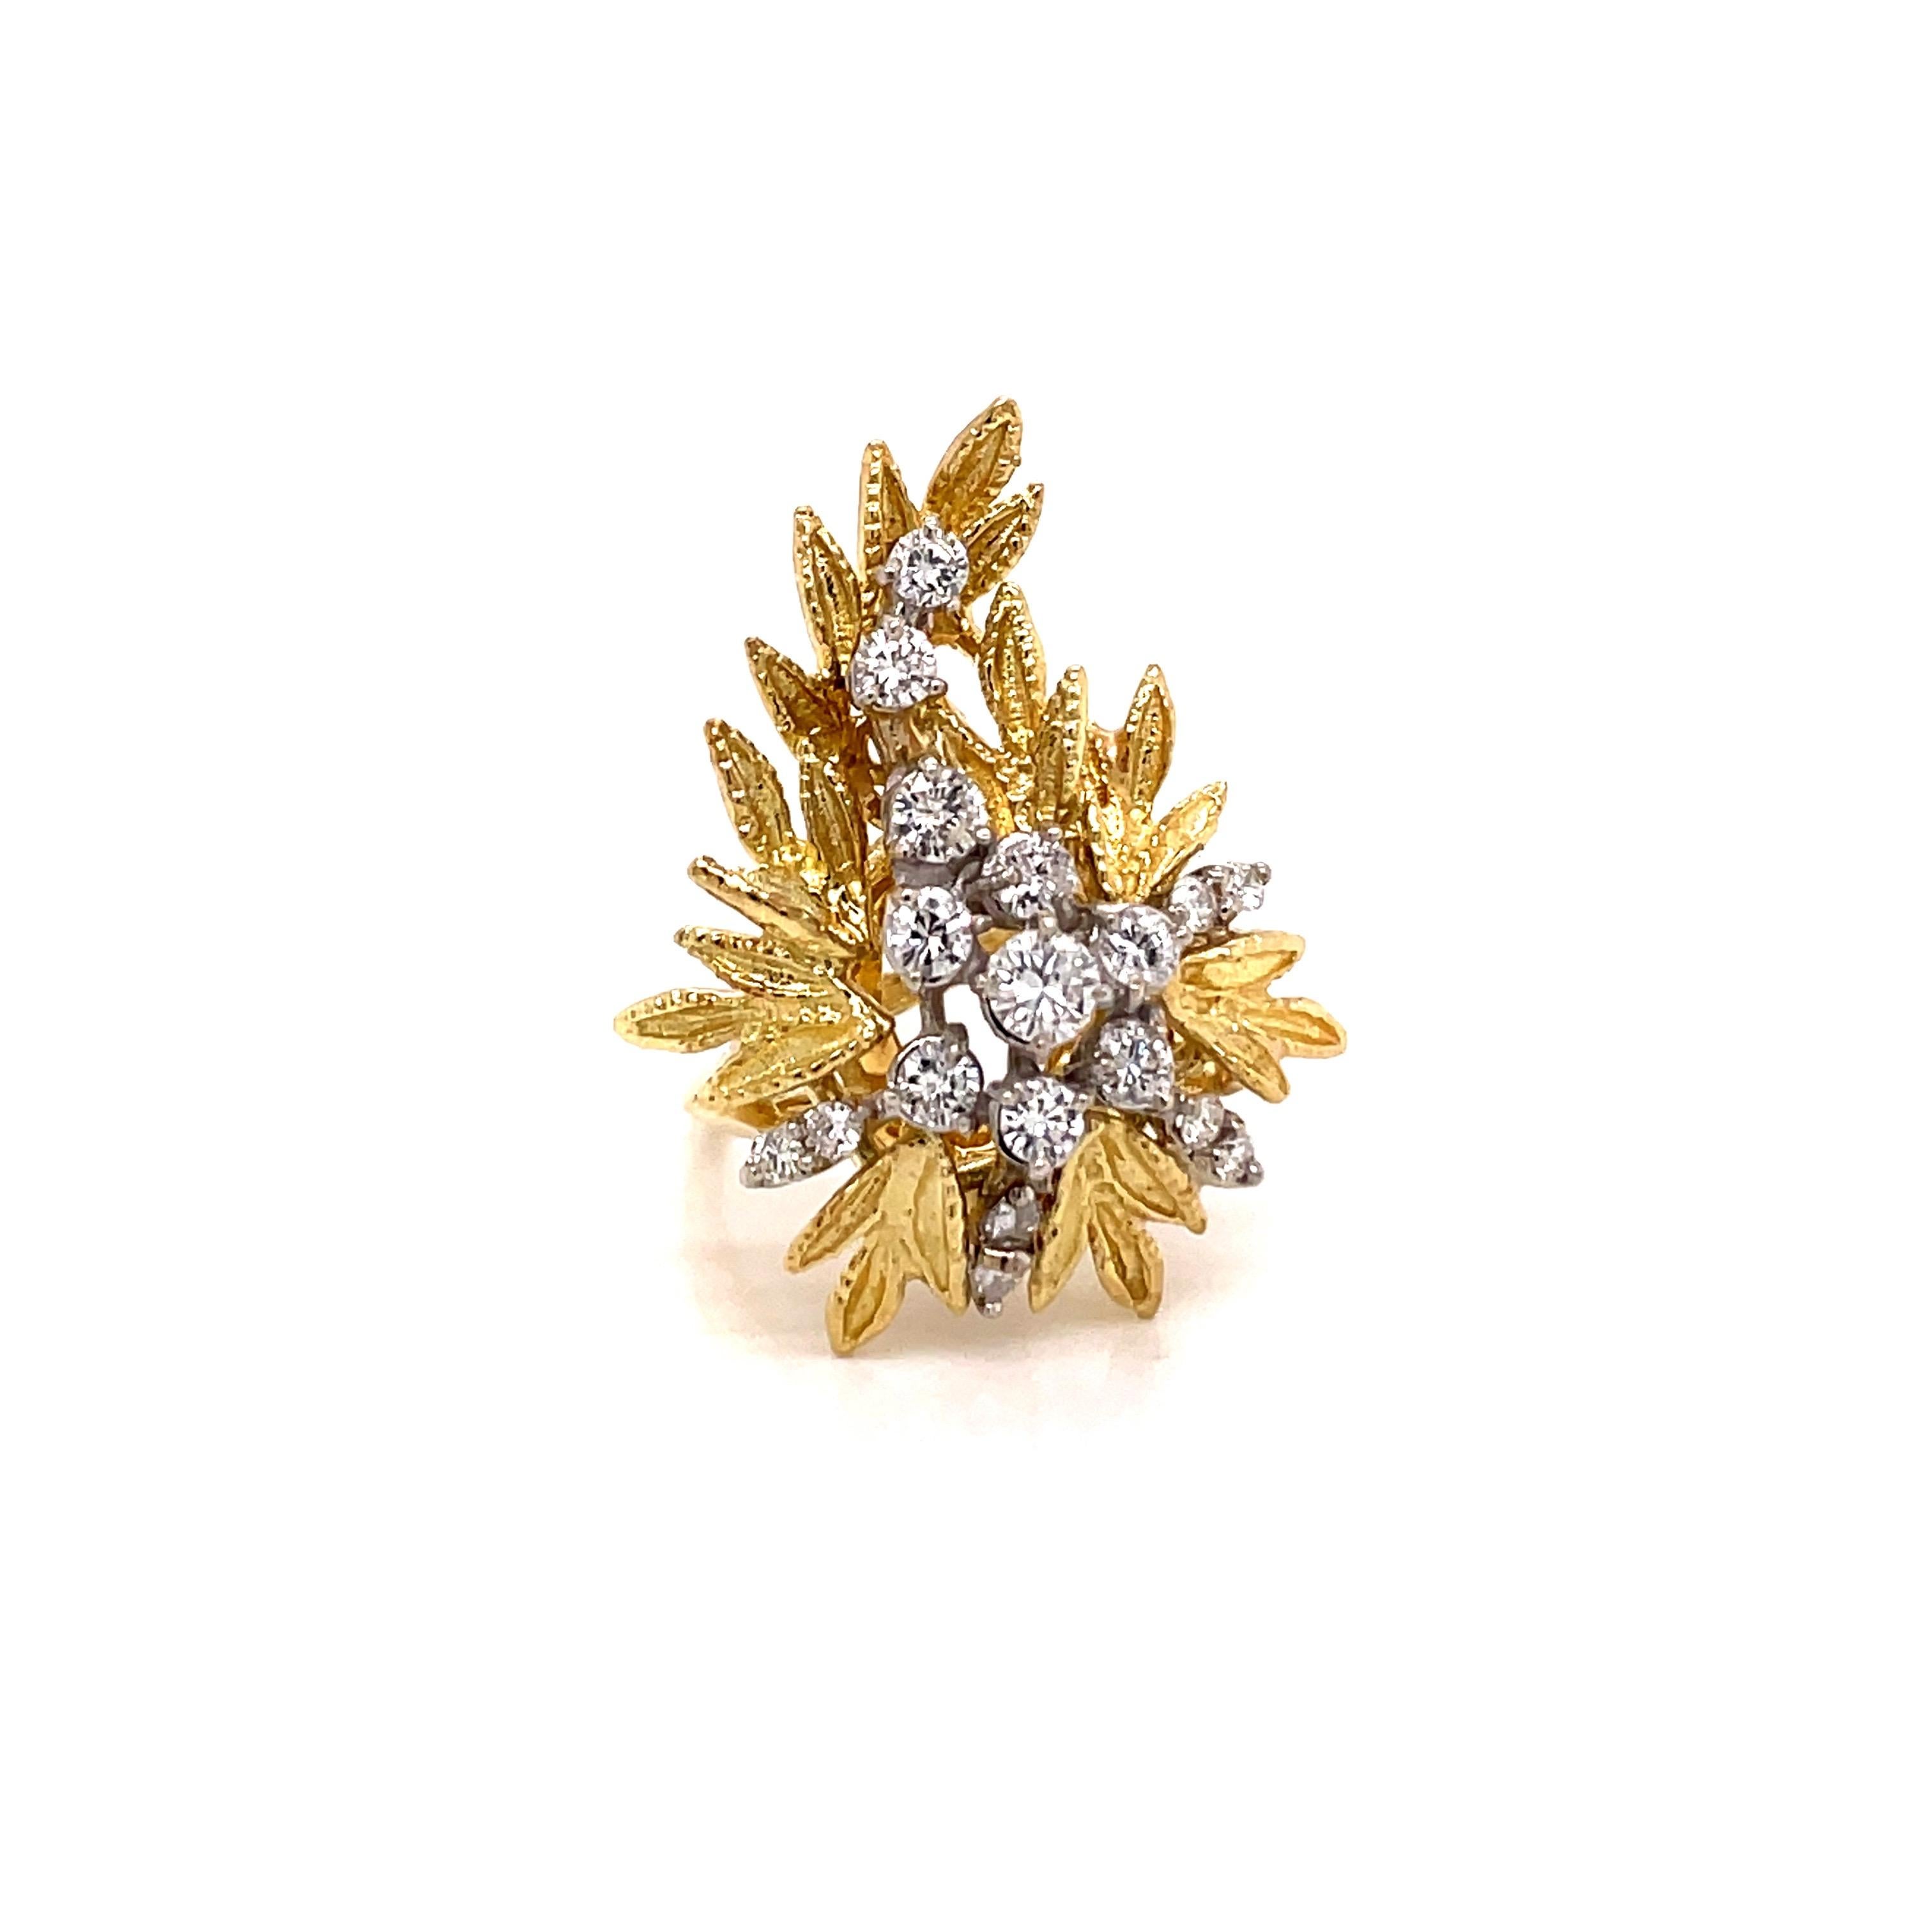 Vintage 18K Yellow Gold Diamond Leaf Ring 1.00ct - The ring is set with 18 round brilliant diamond with an approximate weight of 1.00ct. The diamond quality is G color and VS - SI clarity and they are set in white gold heads. The leaf measures about